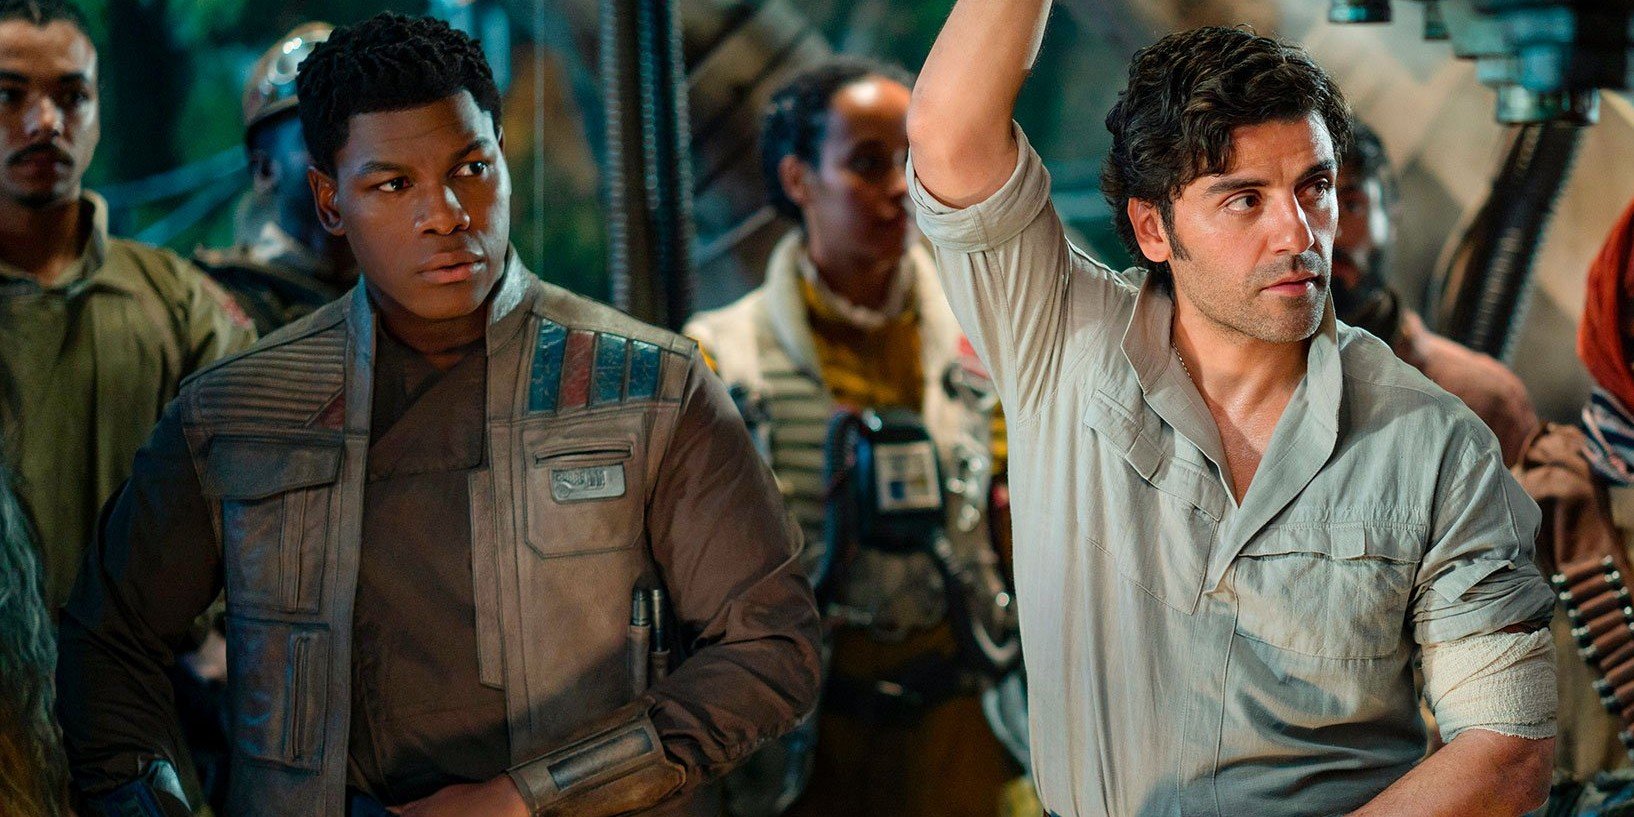 Director JJ Abrams Dives into Finn and Poe’s Unique Bond and LGBTQ Representation in ‘Star Wars: The Rise of Skywalker’